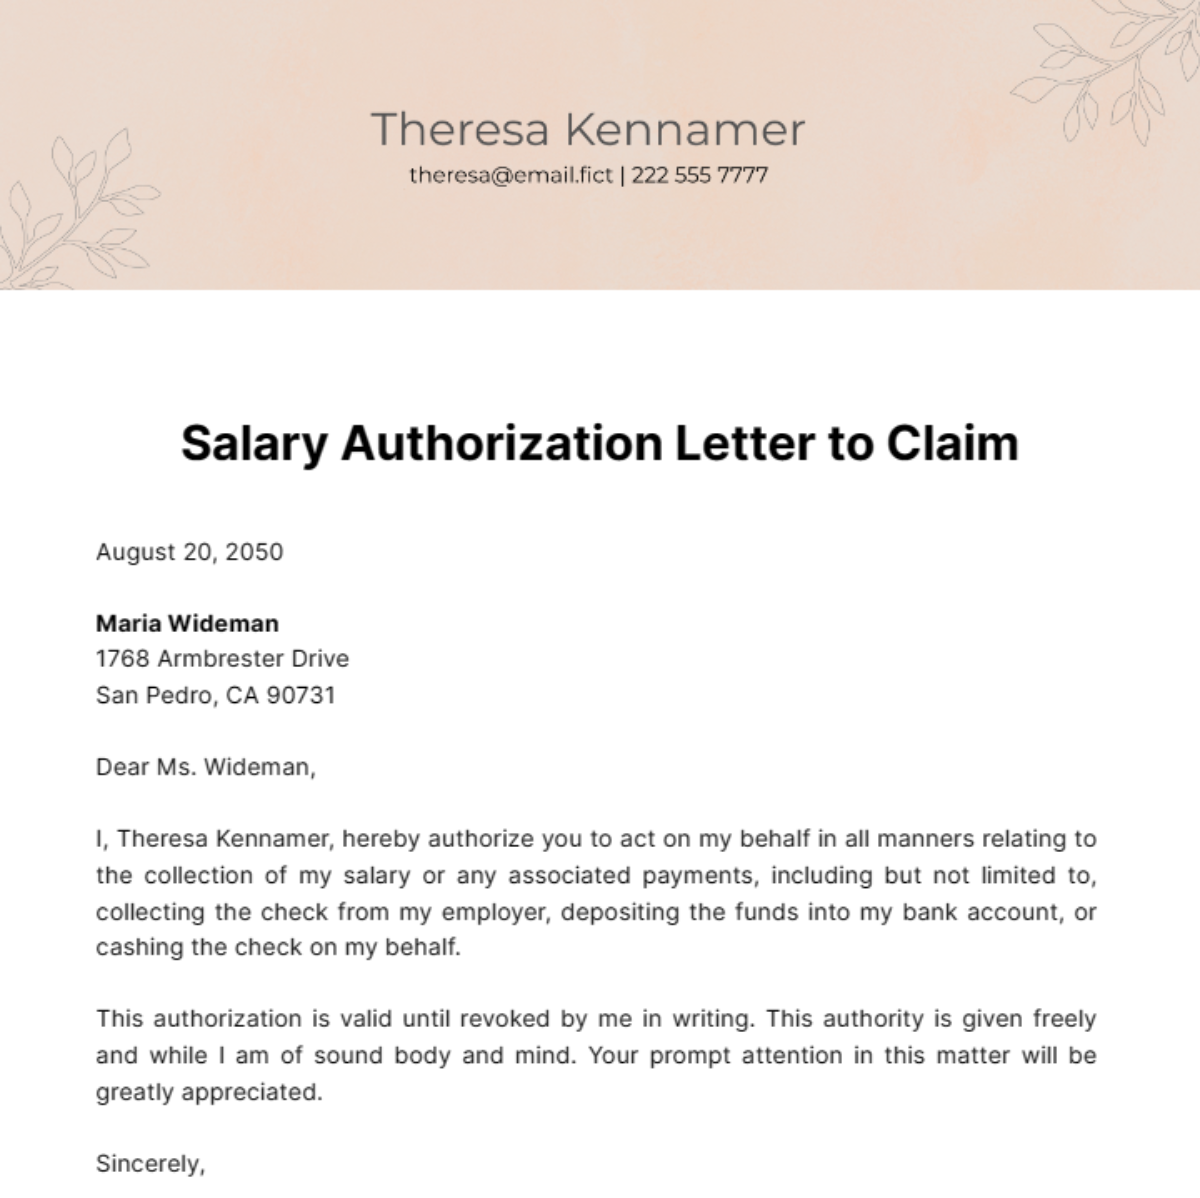 Salary Authorization Letter to Claim Template